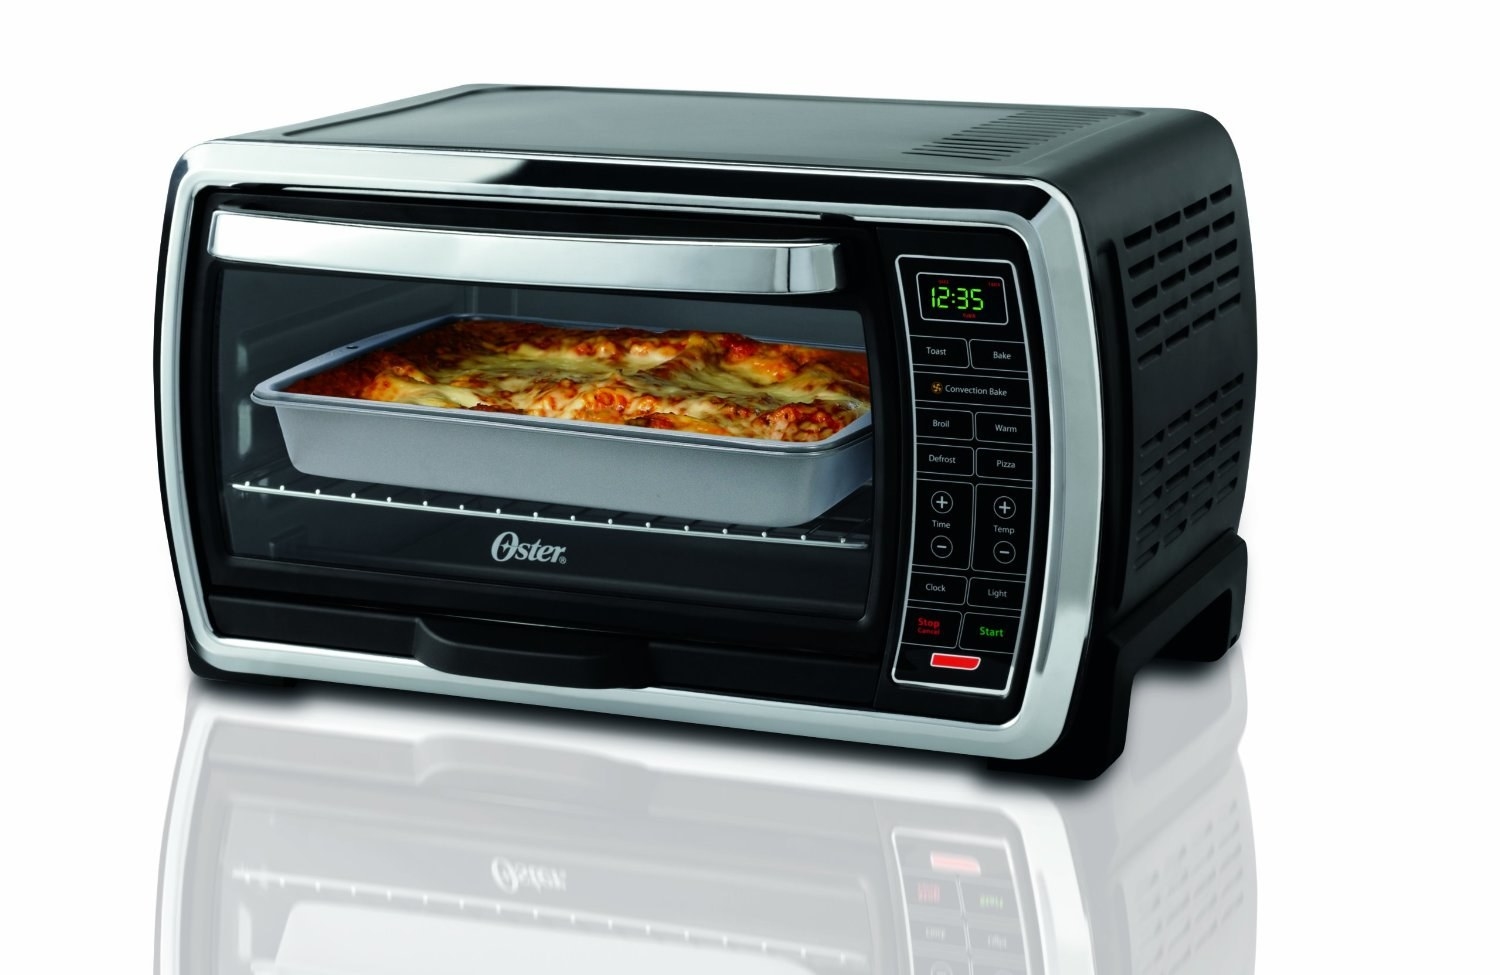 6 Things You Should Never Put in Your Toaster Oven